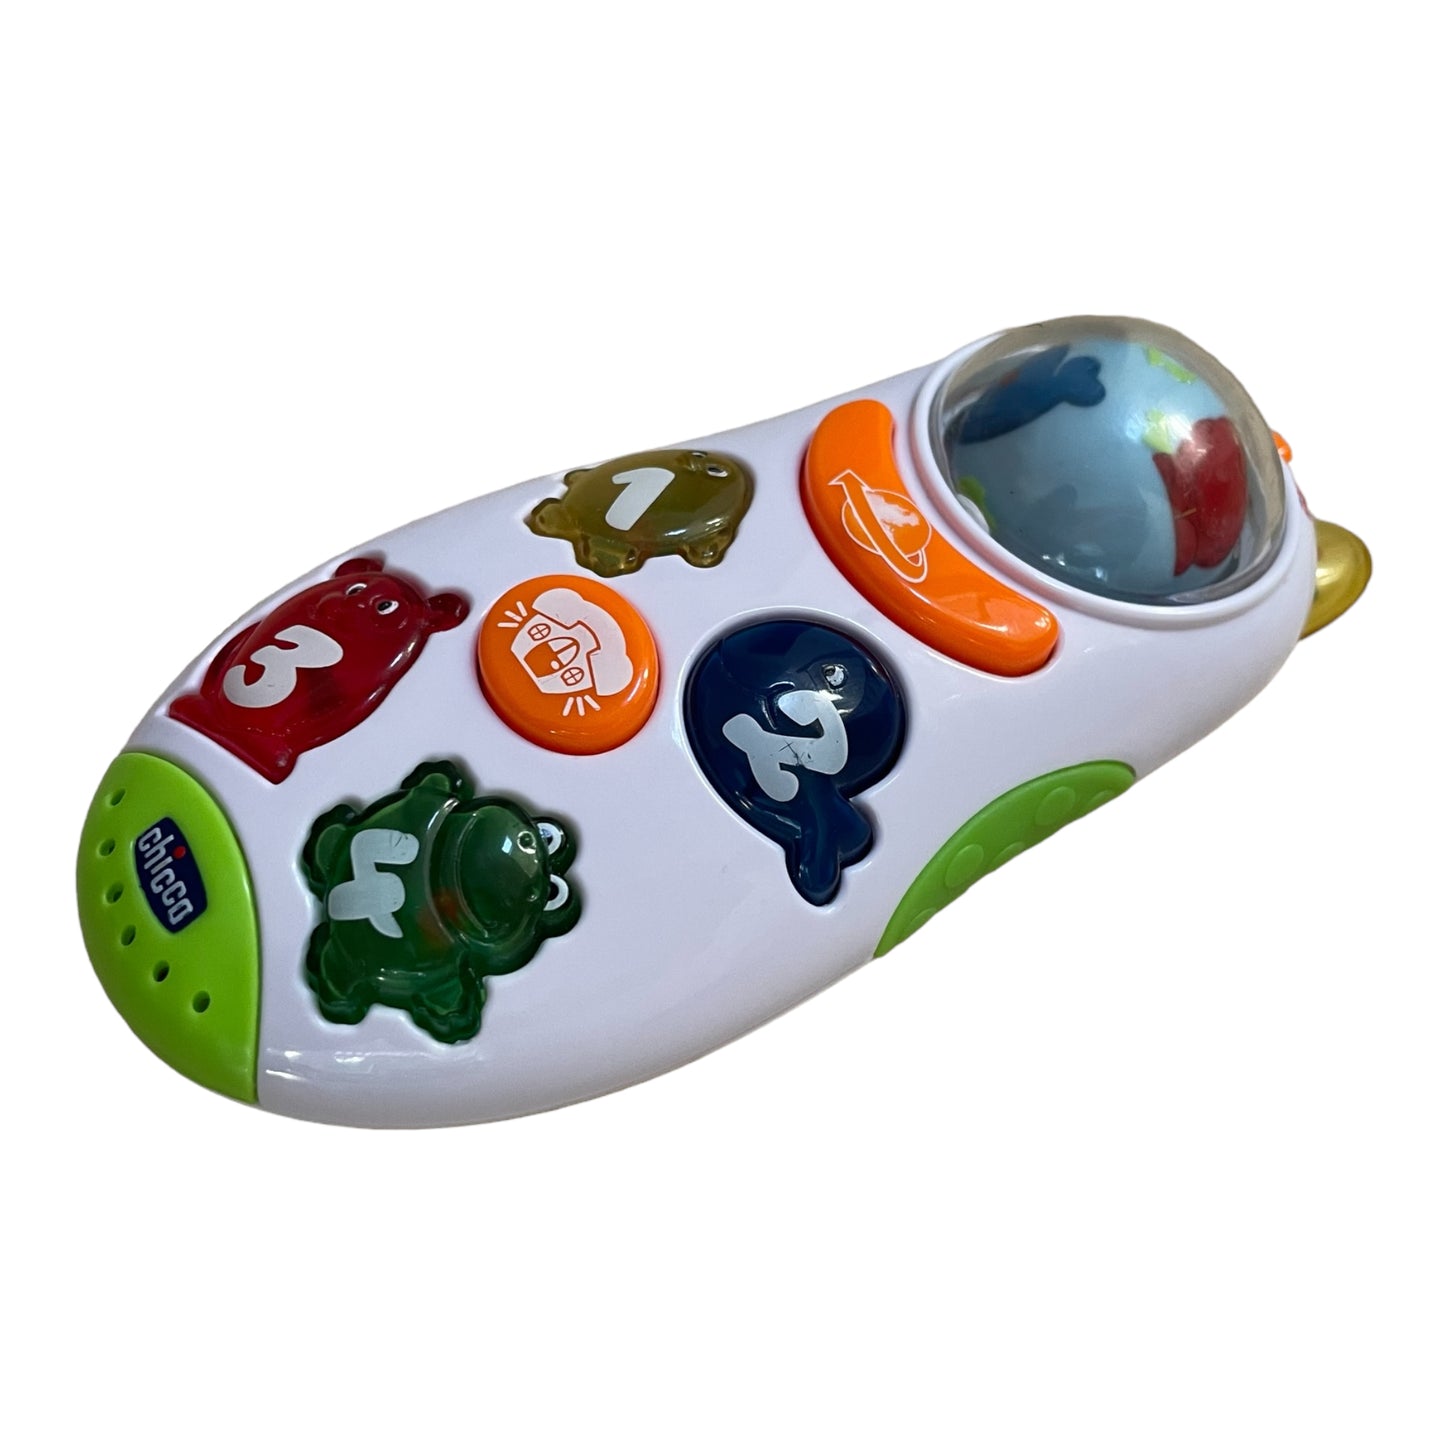 Chicco Globetrotter Handy Talking Telephone, Spinning Globe 6 months + French/English